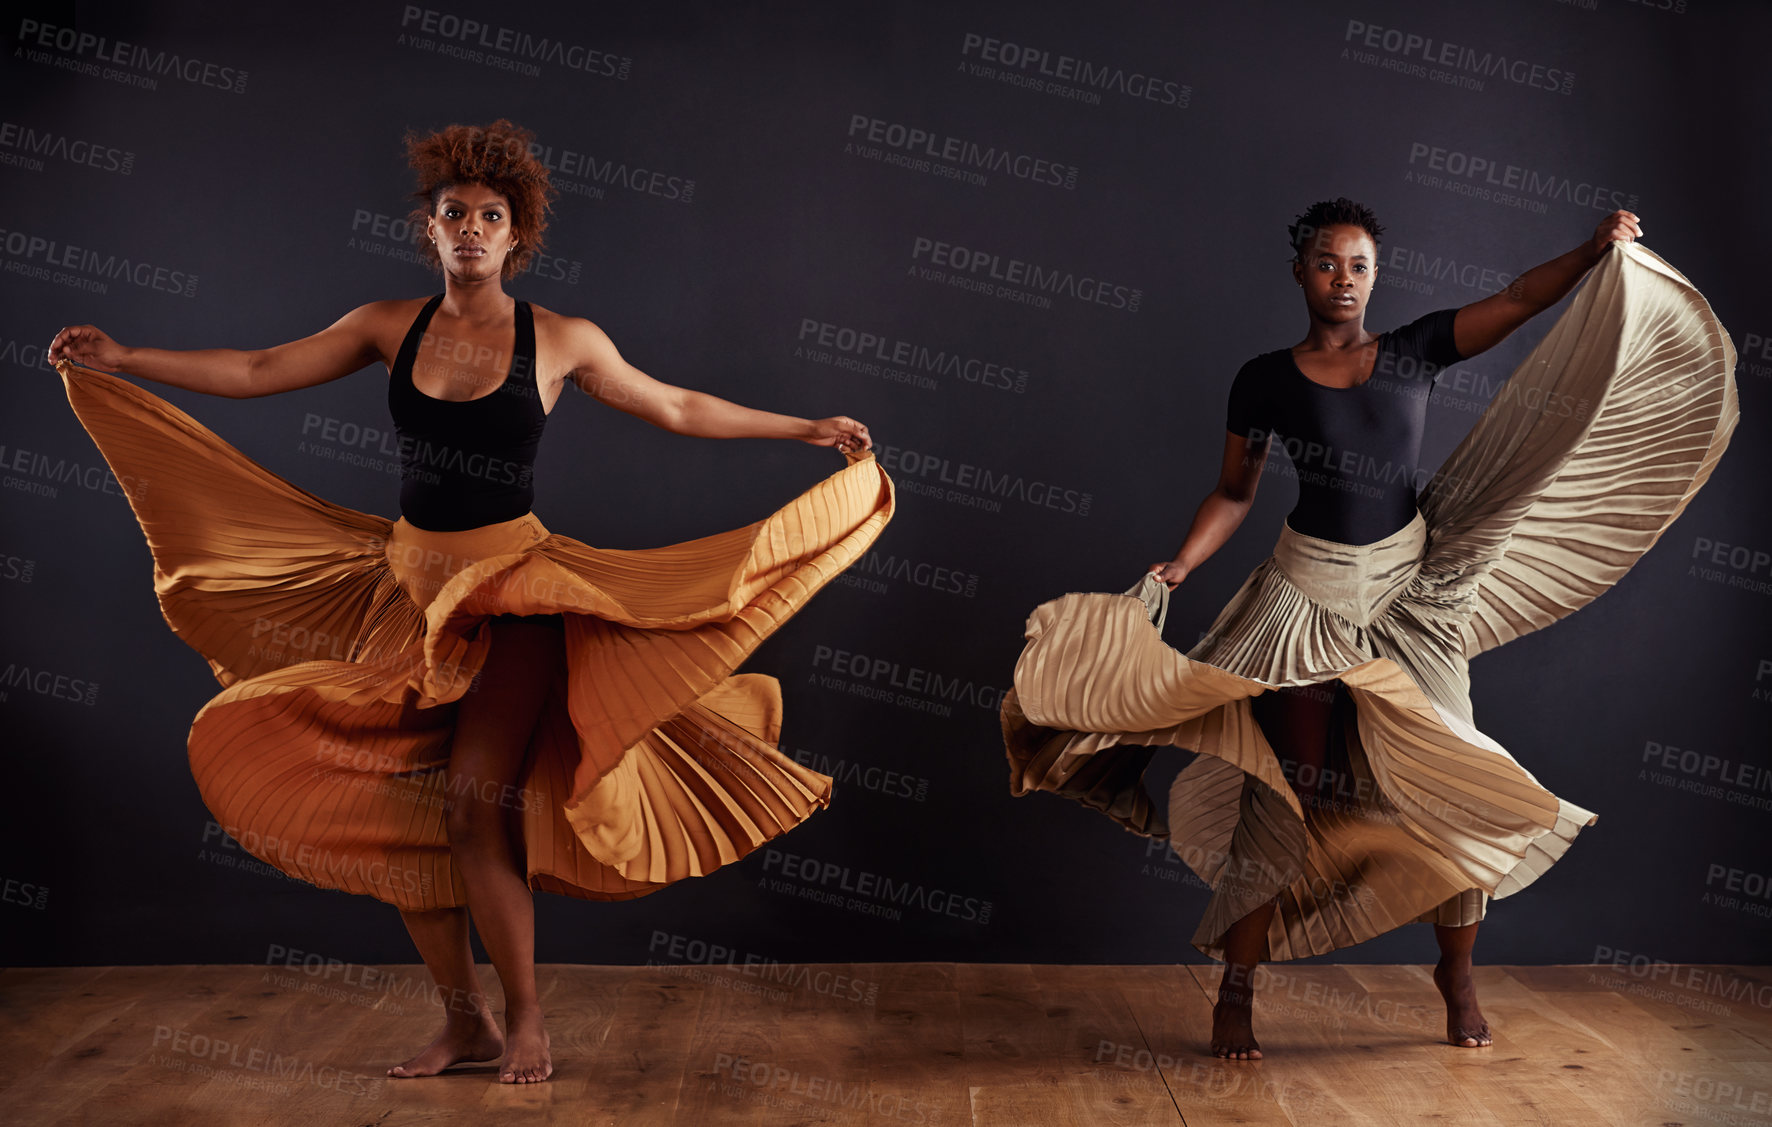 Buy stock photo Two contemporary dancers with flowing skirts in front of a dark background